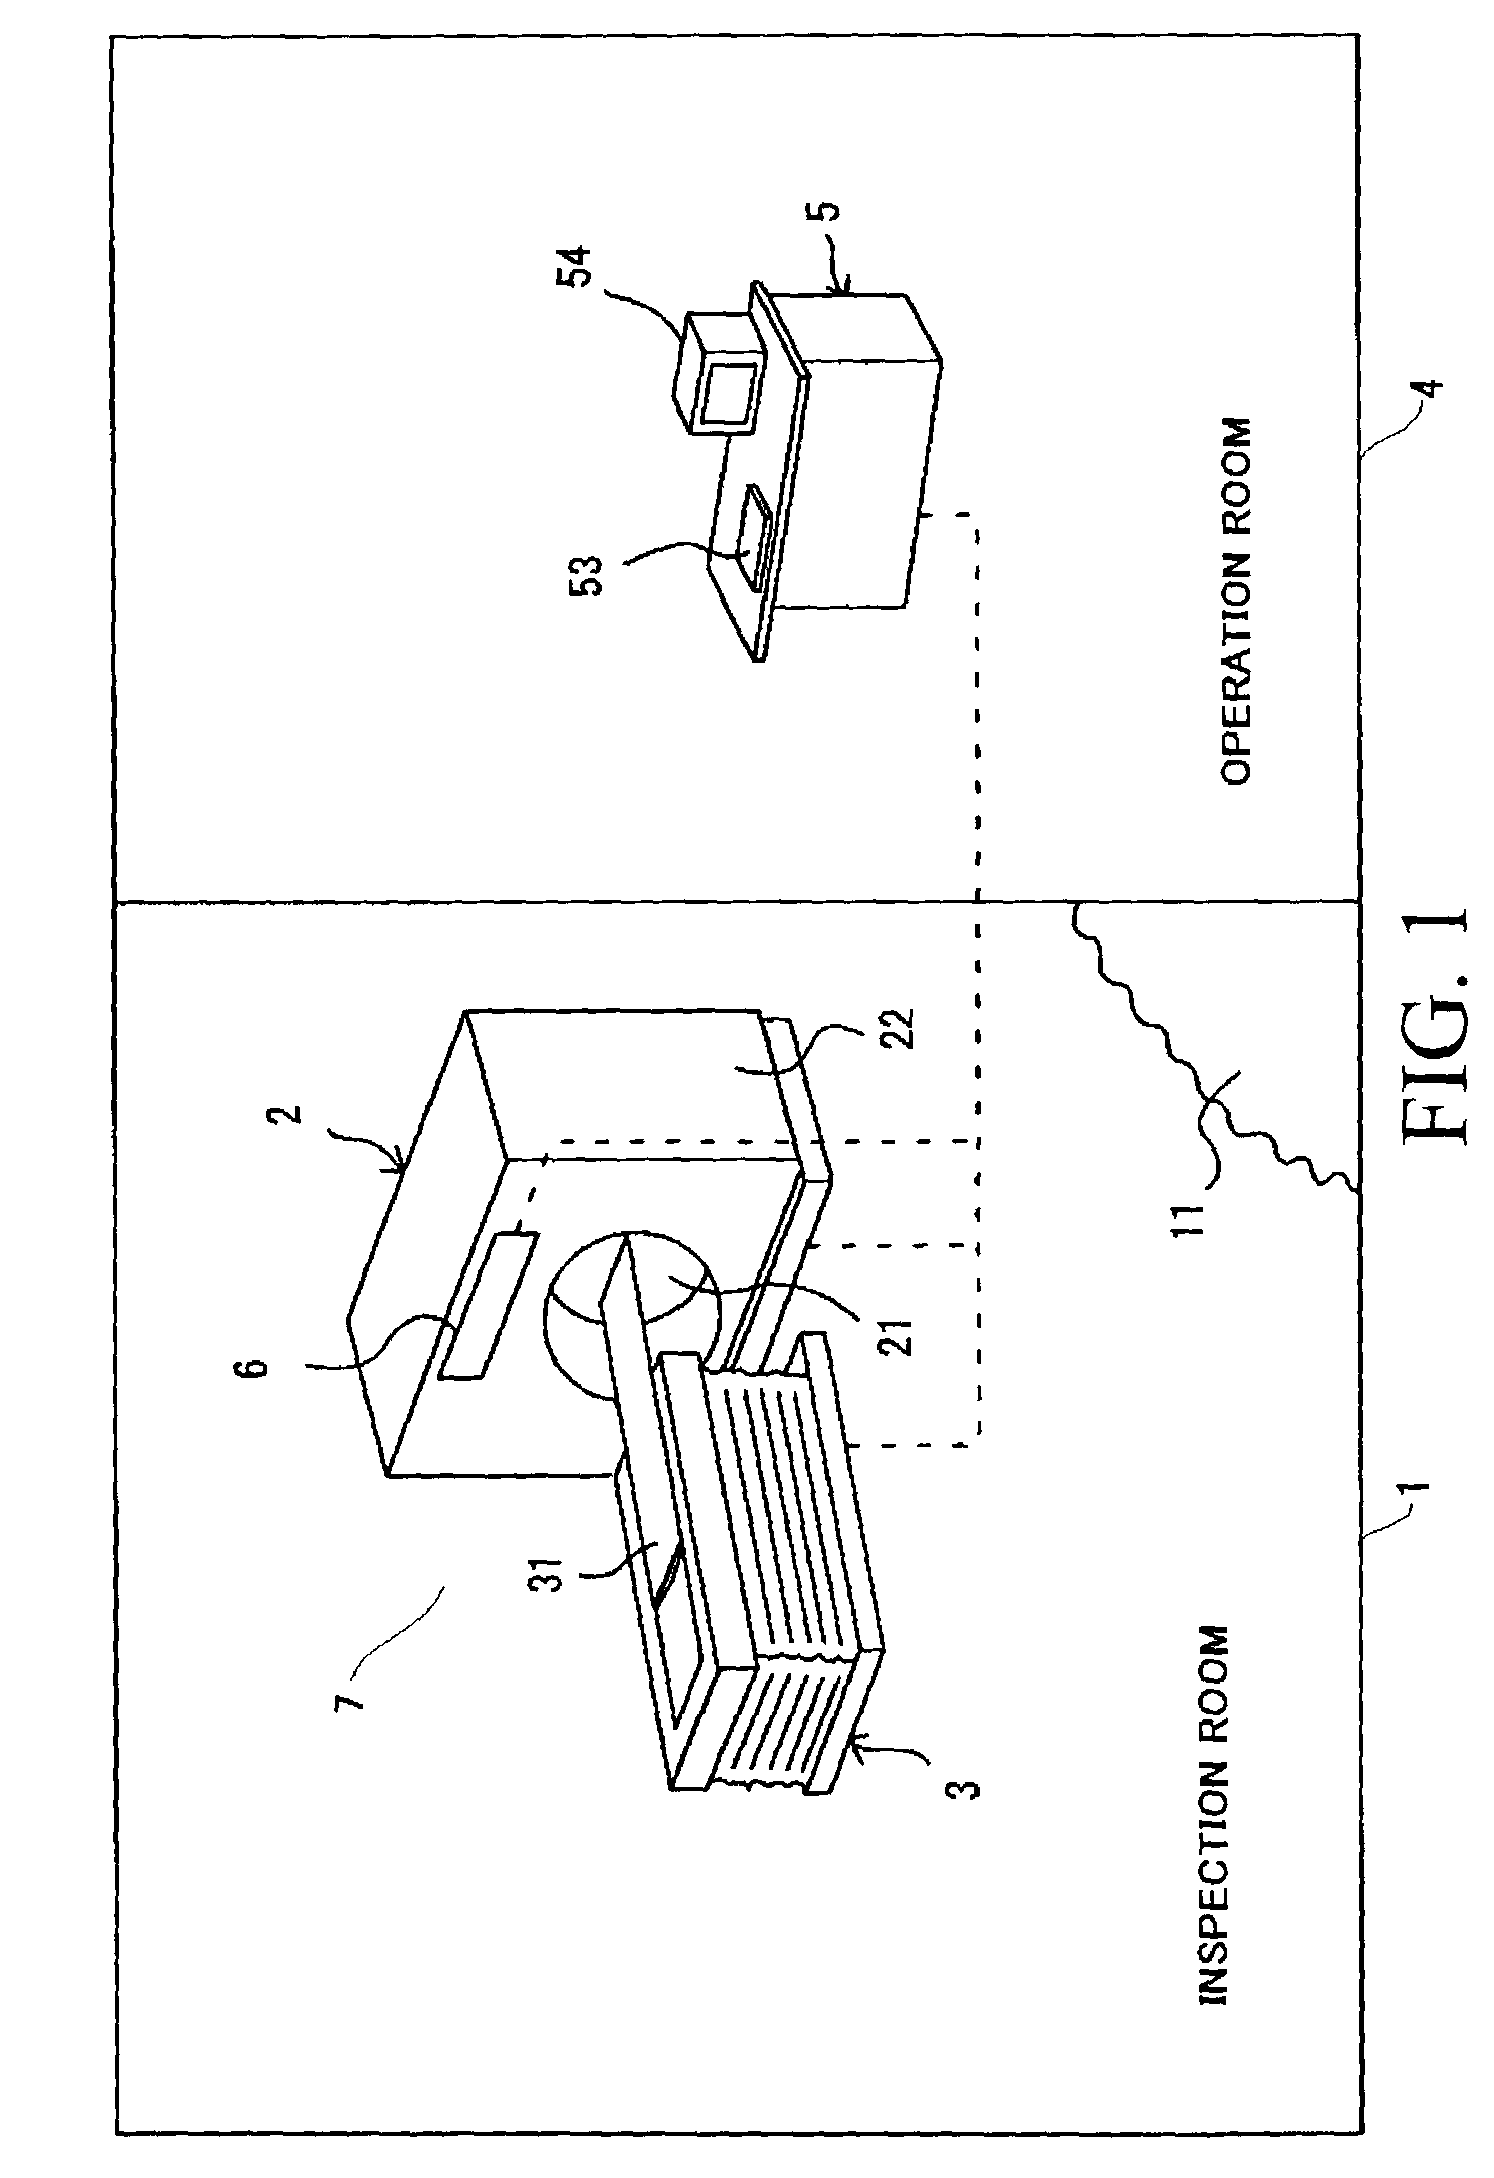 X-ray CT apparatus having a display to display information inputted from a remote operator console